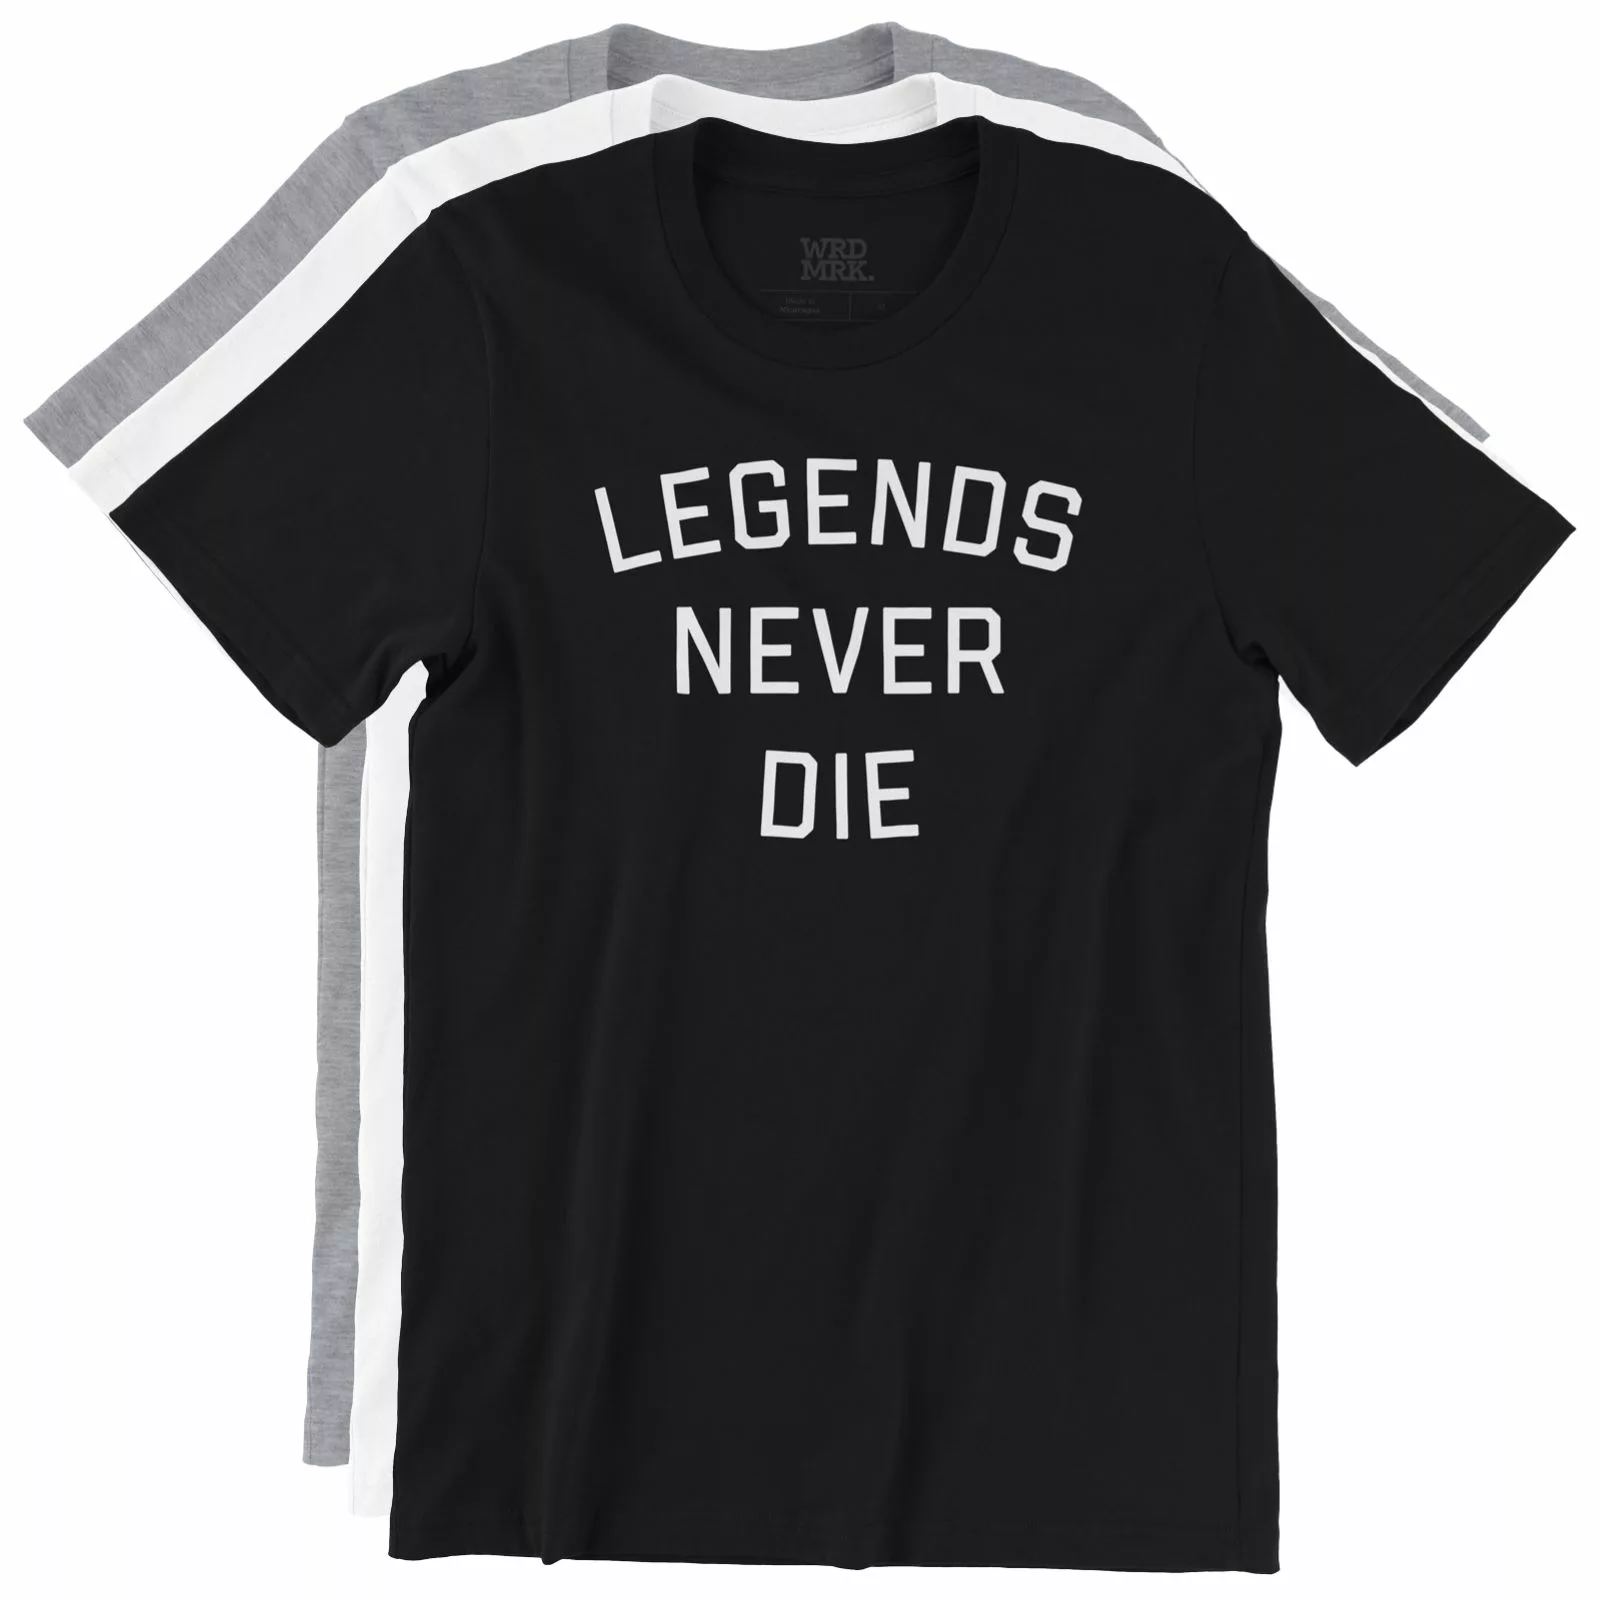 Babe Ruth Quote: “Heroes get remembered, but legends never die.”